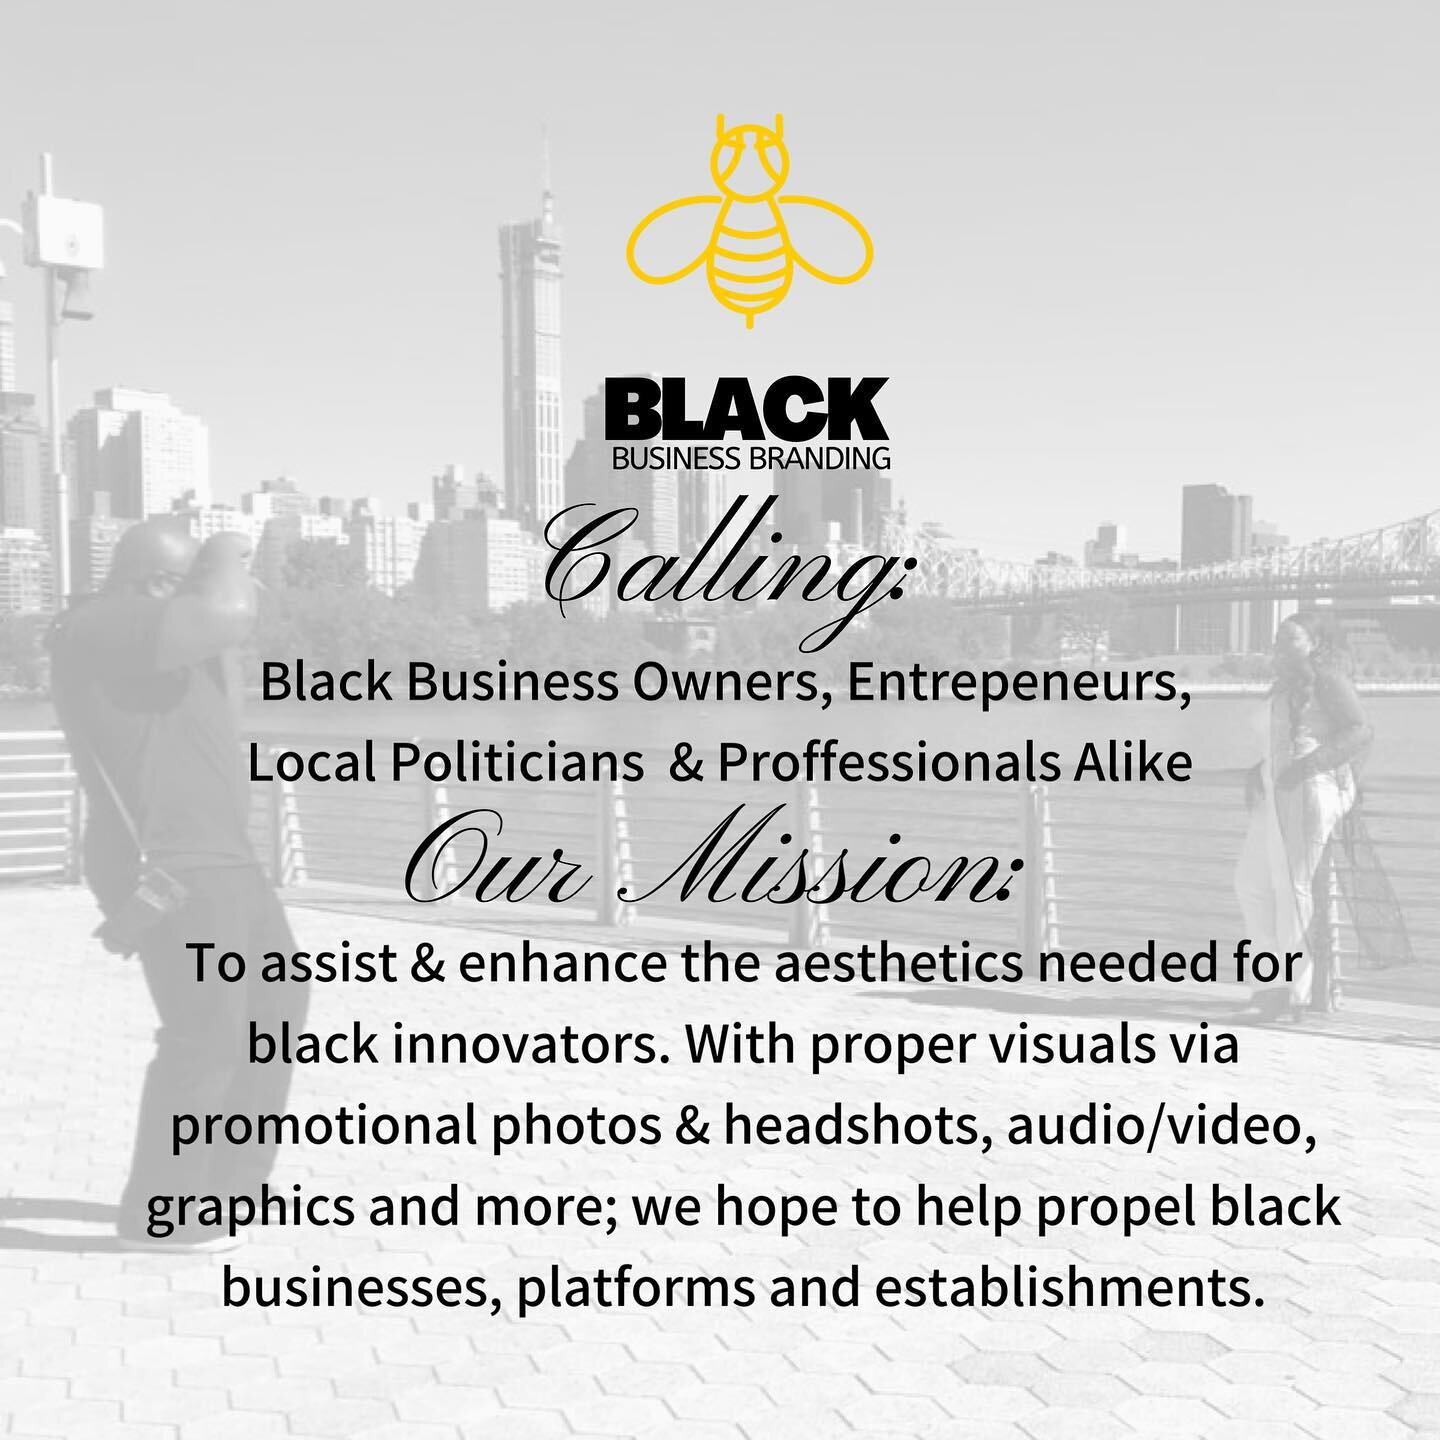 MISSION STATEMENT: @blackbusinessbranding  was created to assist &amp; enhance the aesthetics needed for black innovators. With proper visuals via promotional photos &amp; headshots, audio/video, graphics and more; we hope to help propel black busine